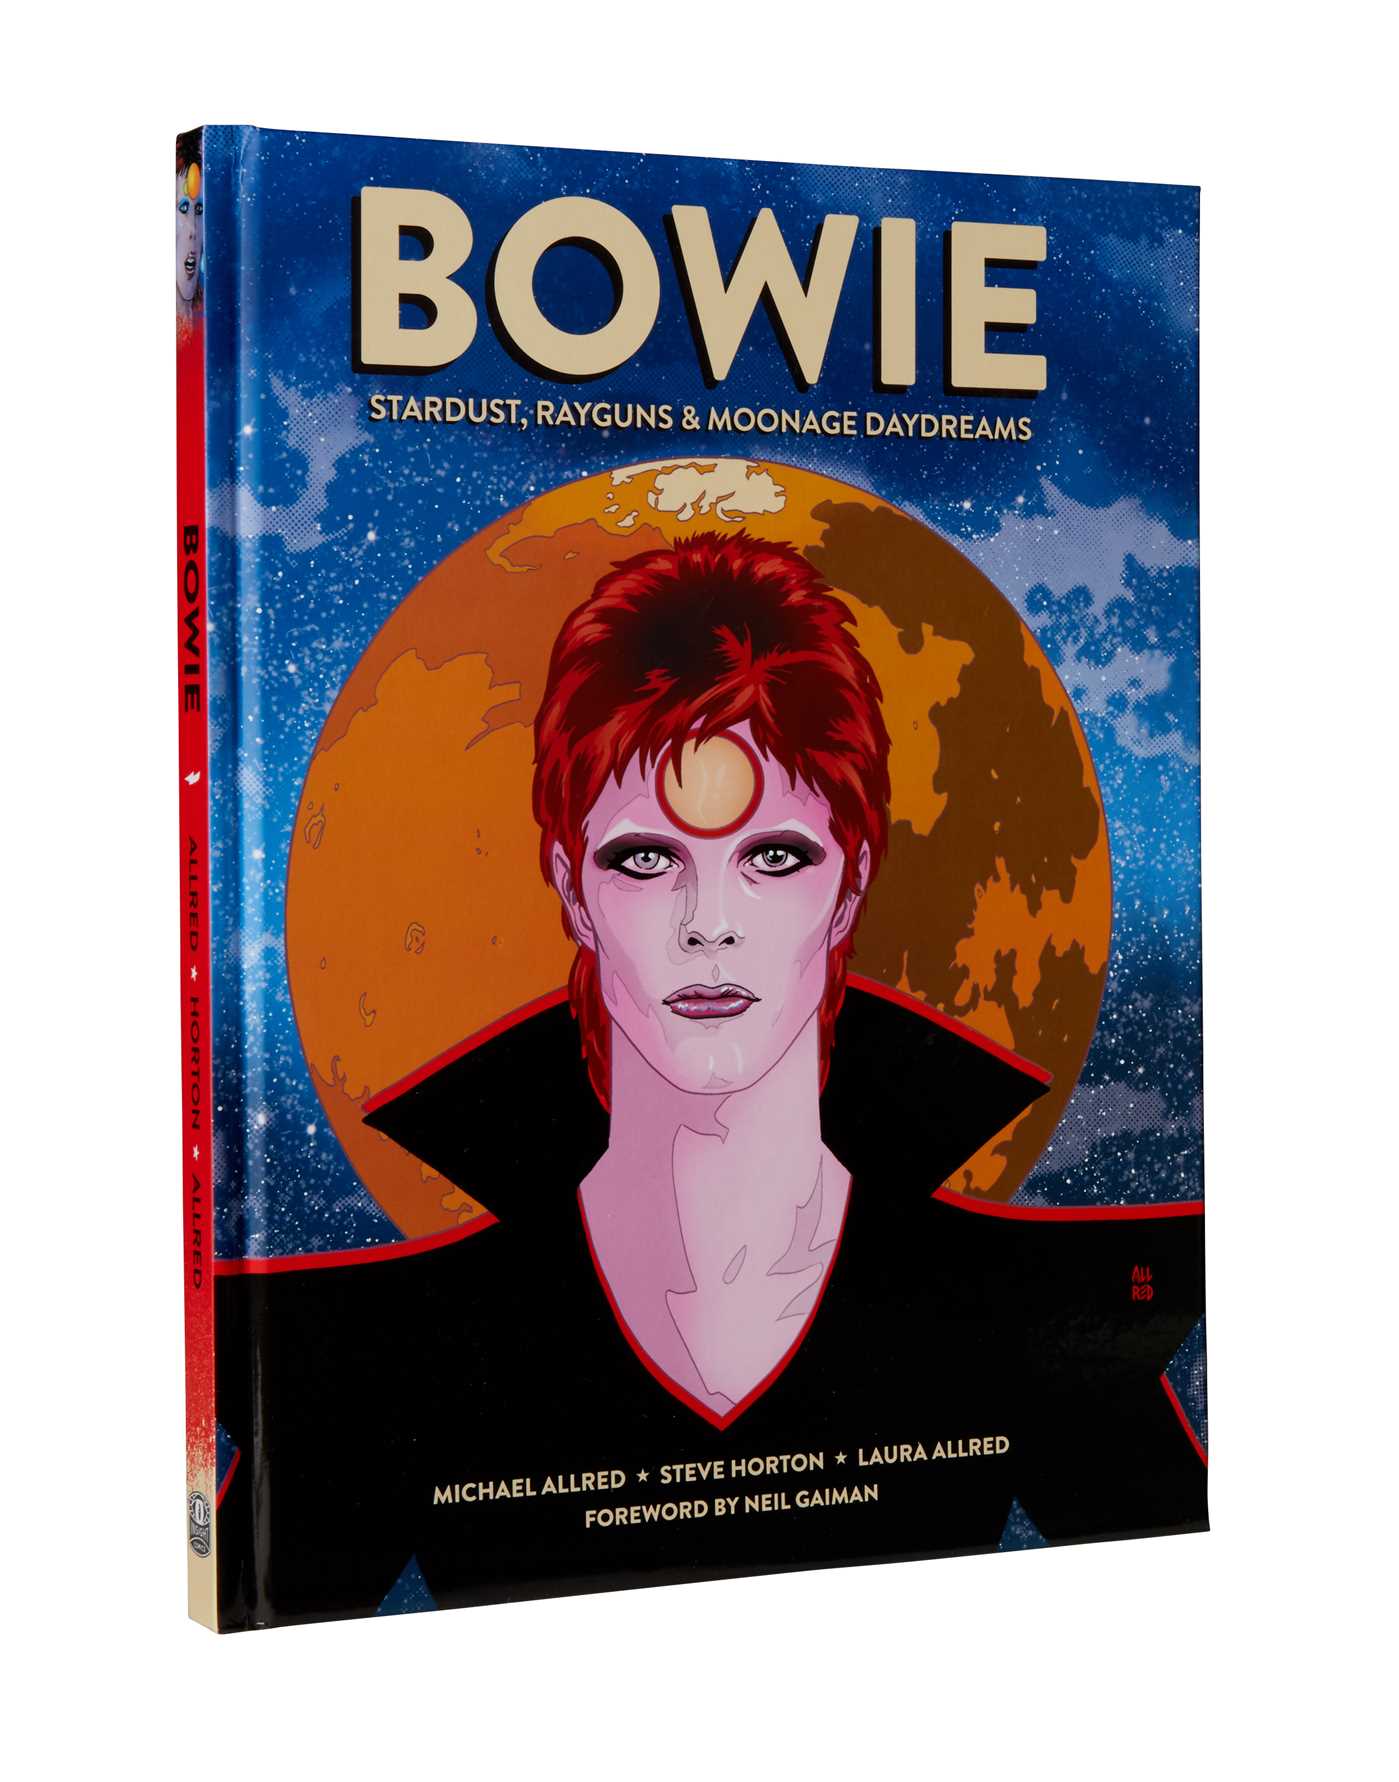 BOWIE : Stardust, Rayguns, & Moonage Daydreams (OGN biography of Ziggy Stardust, gift for Bowie fan, gift for music lover, Neil Gaiman, Michael Allred) (Hardcover) - image 1 of 1